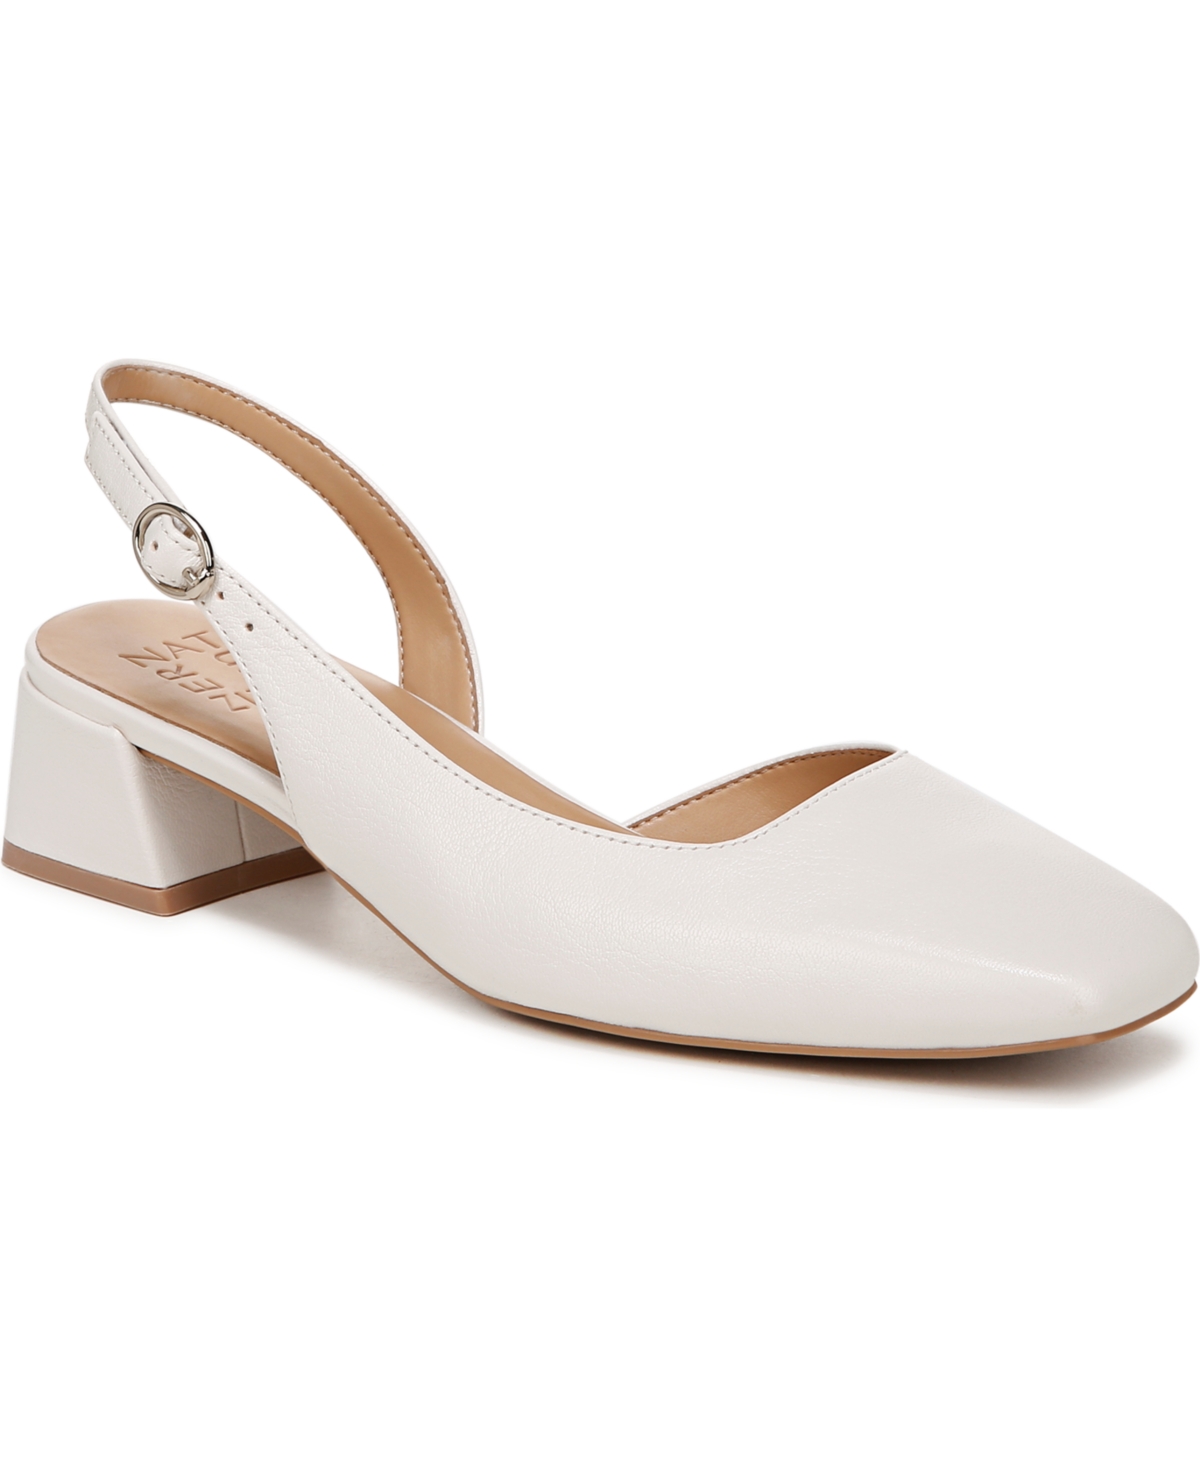 Naturalizer Jayla Slingback Pumps In Warm White Leather